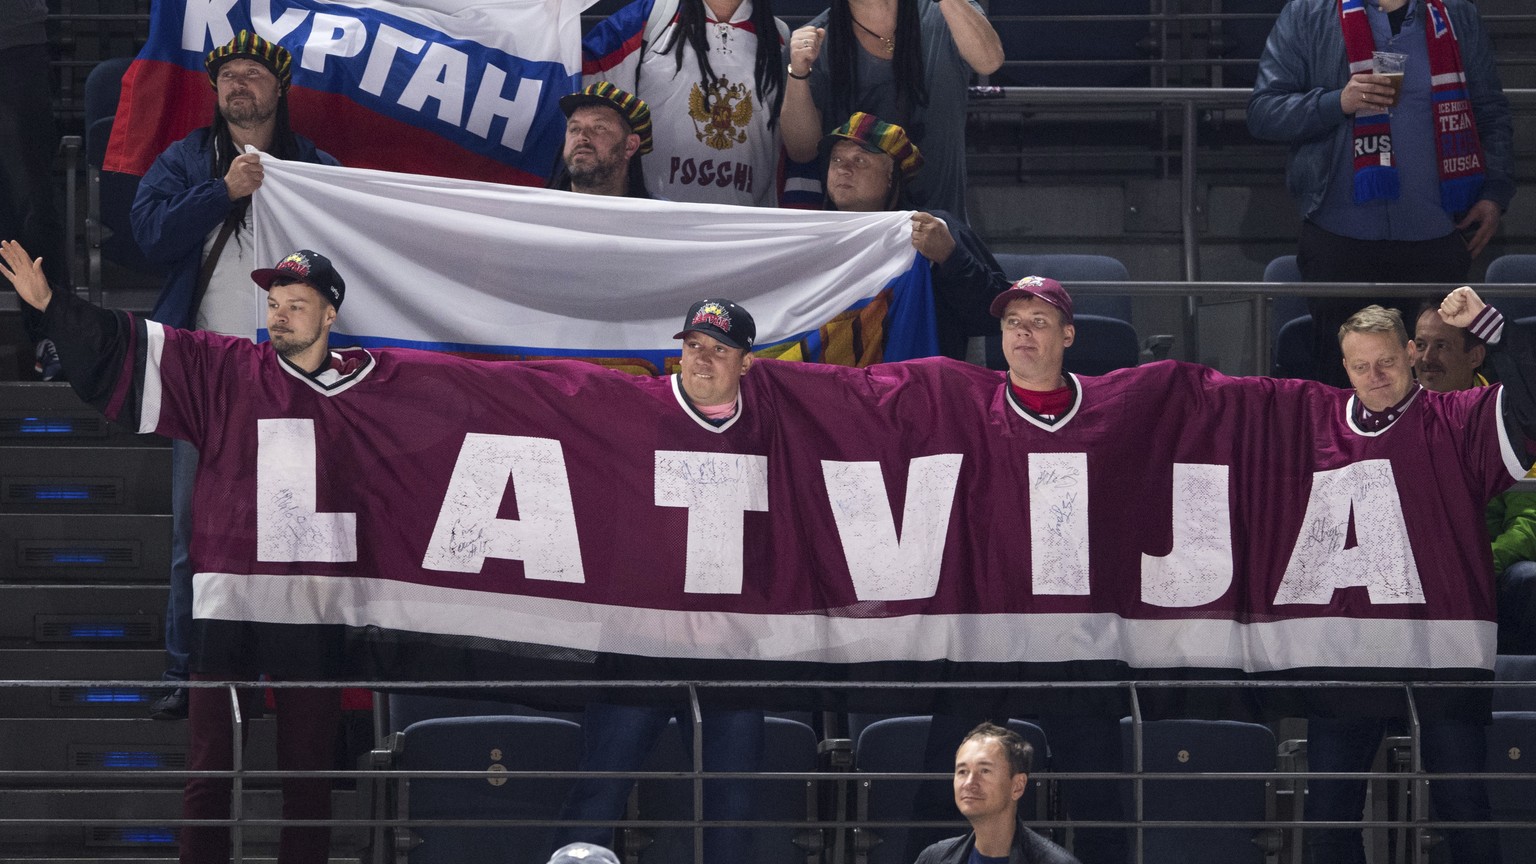 Latvia ice hockey team fans encourage their team during the IIH World Championship group A ice hockey match between Russia and Latvia at the Lanxess Arena in Cologne, Germany, Monday May 15, 2017. (Ma ...